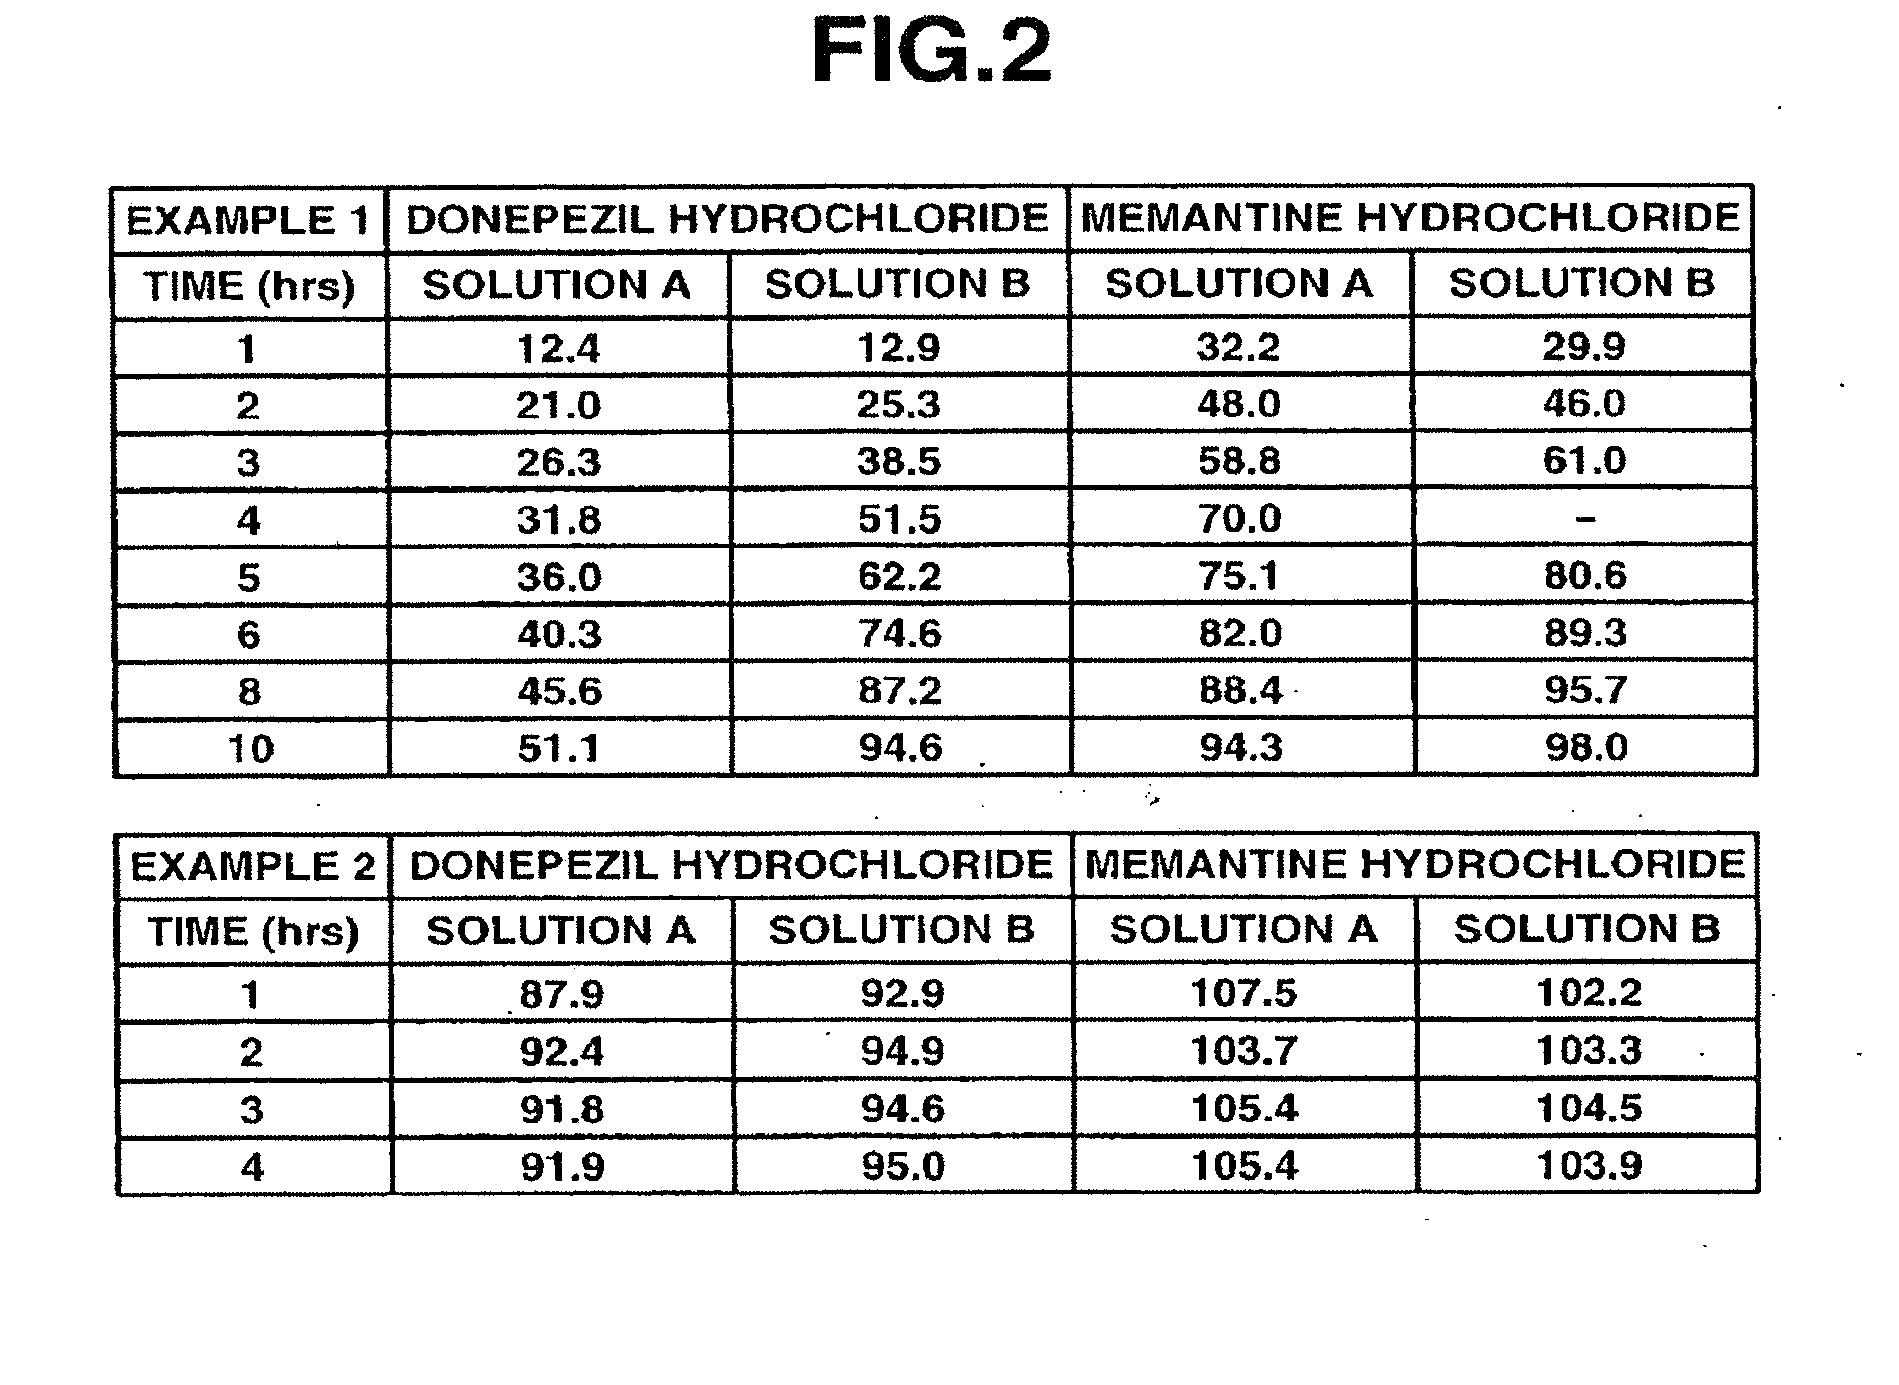 Composition Containing Two Anti-Dementia Drugs